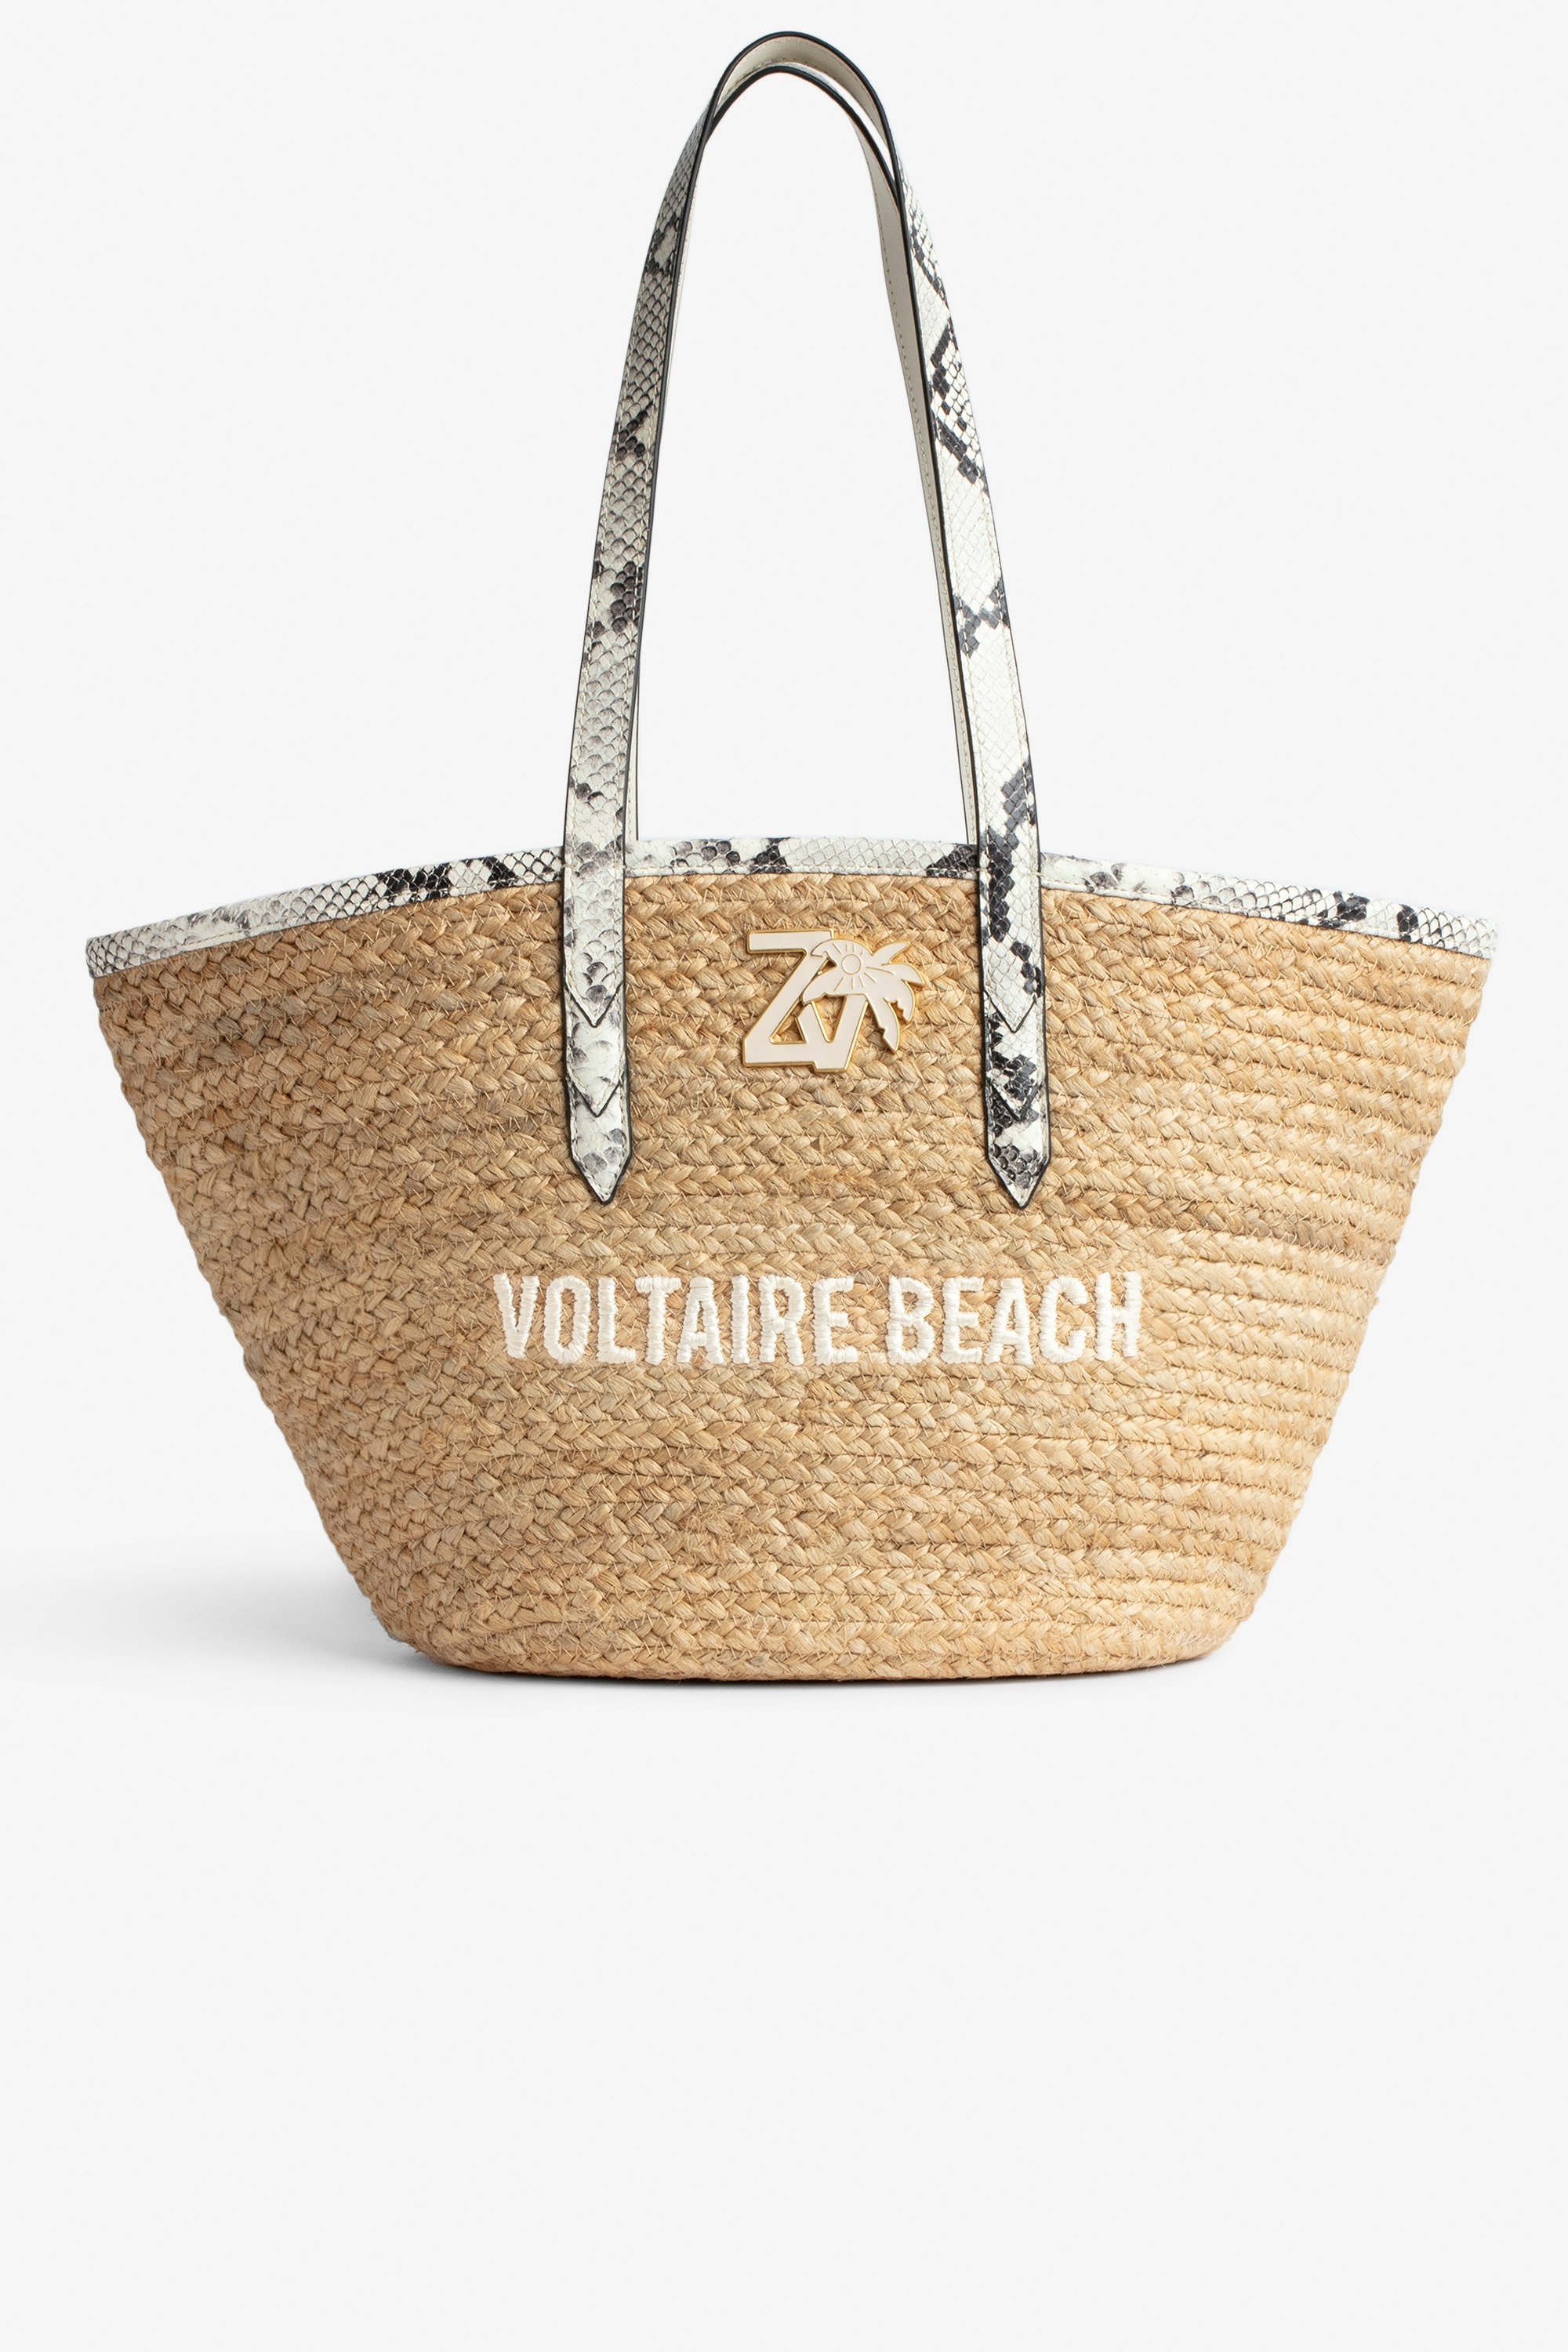 Le Beach Bag Women's straw bag with off-white snakeskin-effect leather handles, "Voltaire Beach" embroidery and ZV charm